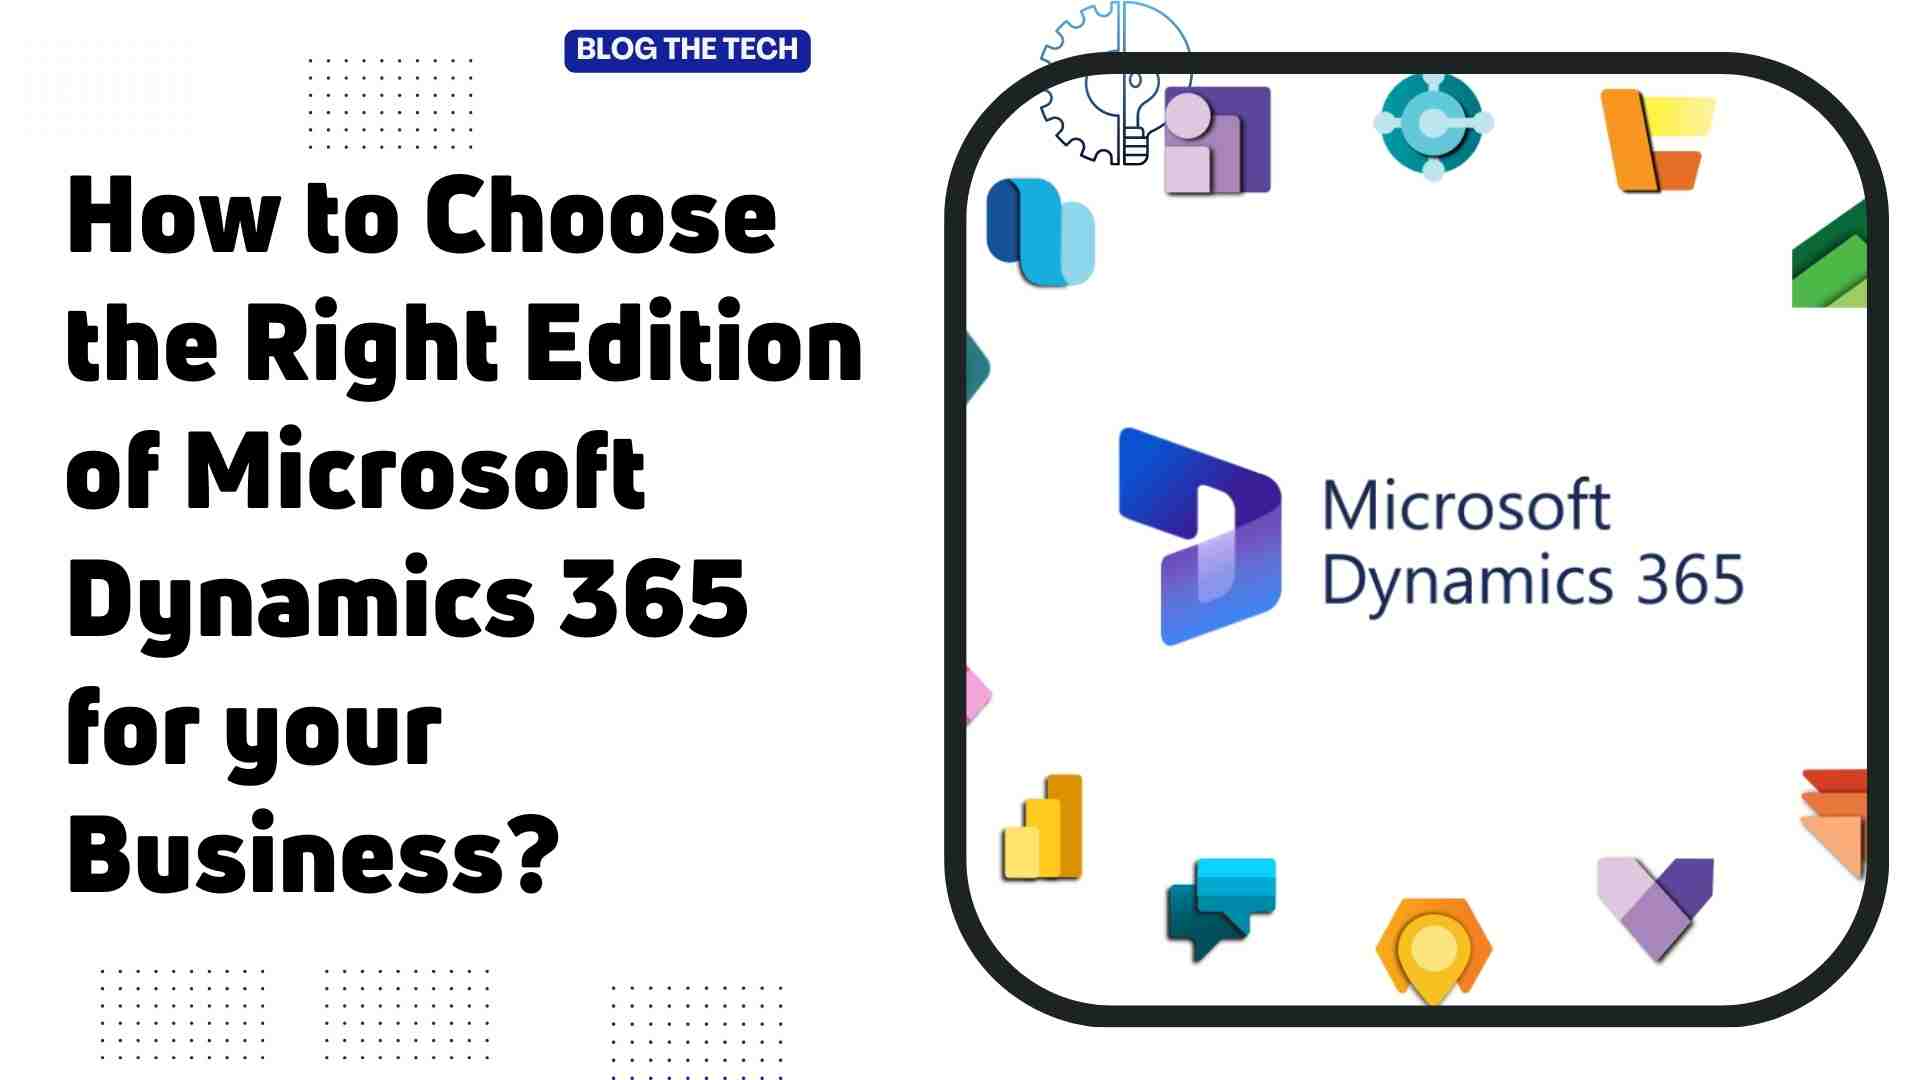 Choosing the Right Microsoft Dynamics 365 Edition for Your Business